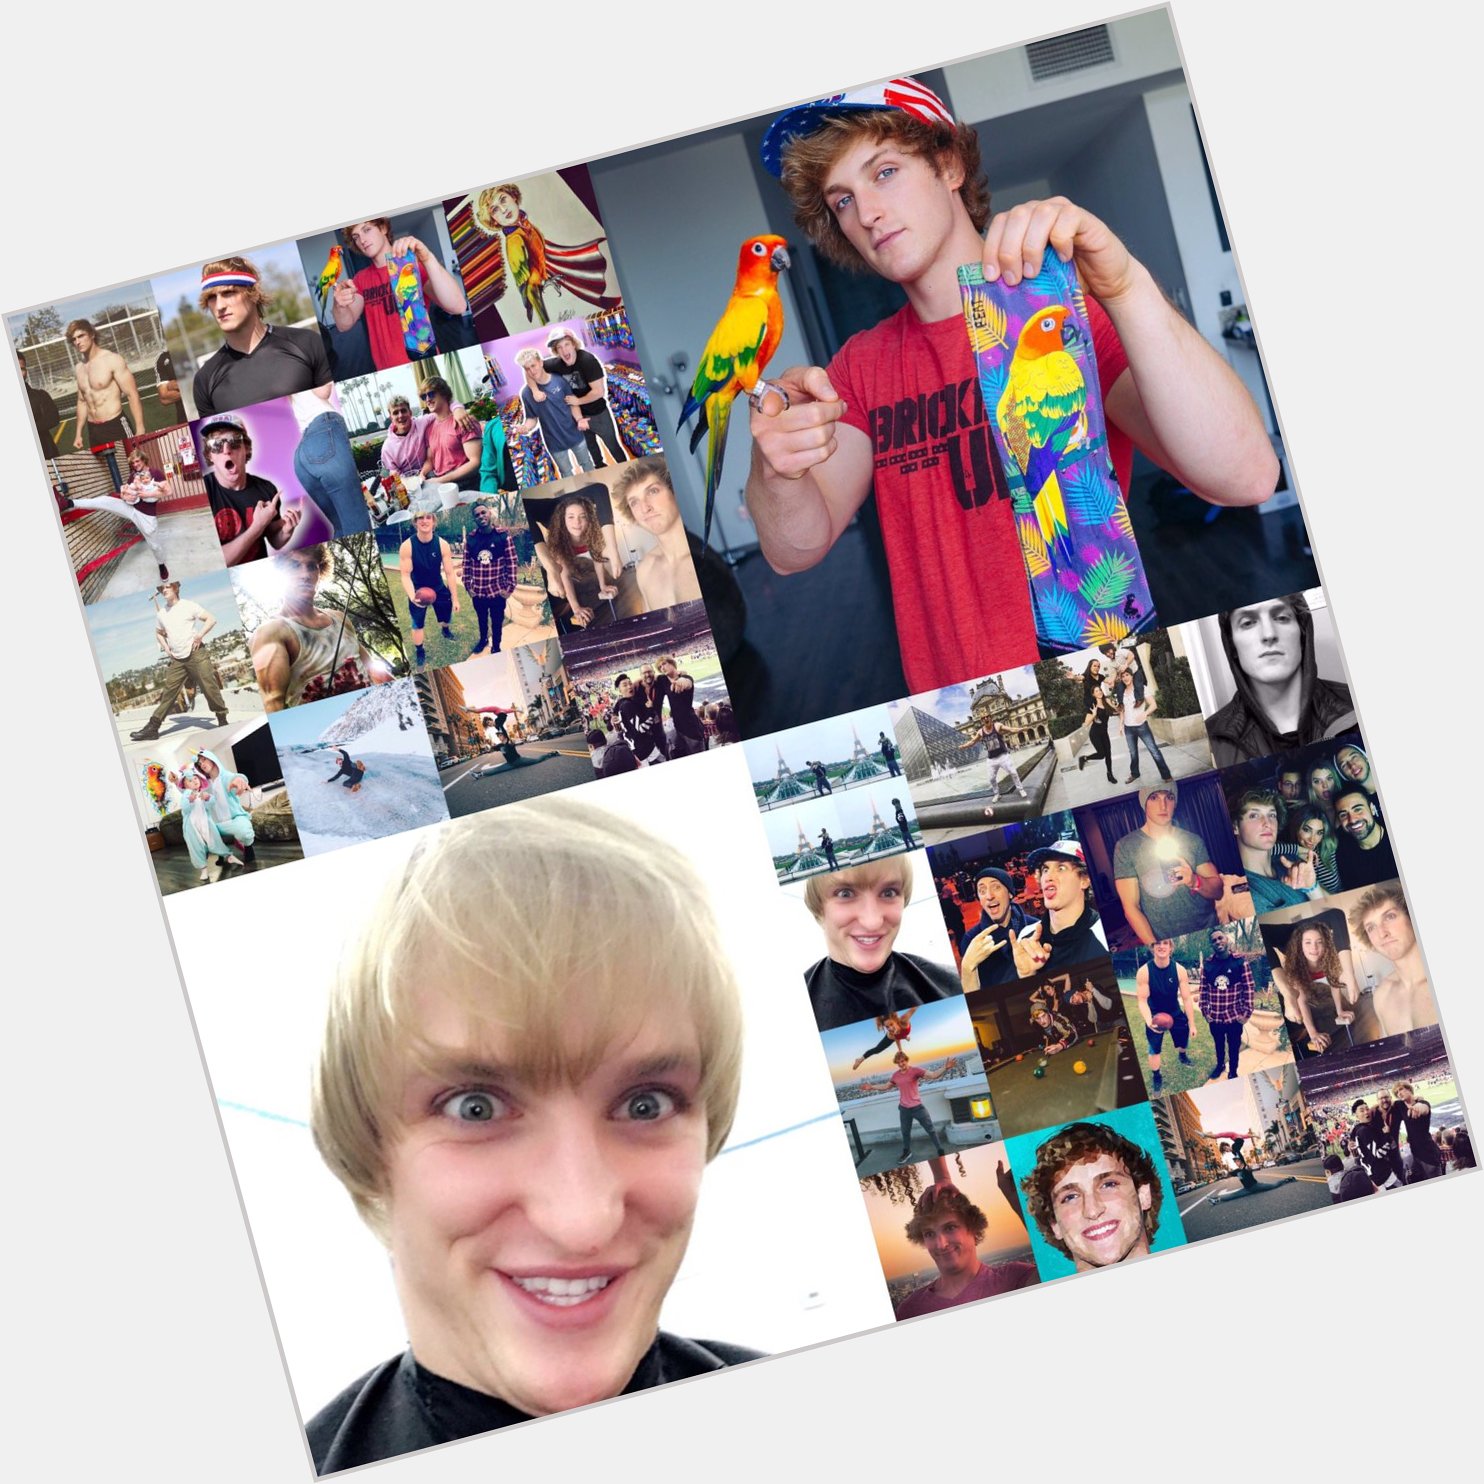  HAPPY 22nd BIRTHDAY LOGAN PAUL!! HAVE A NICE DAY!   